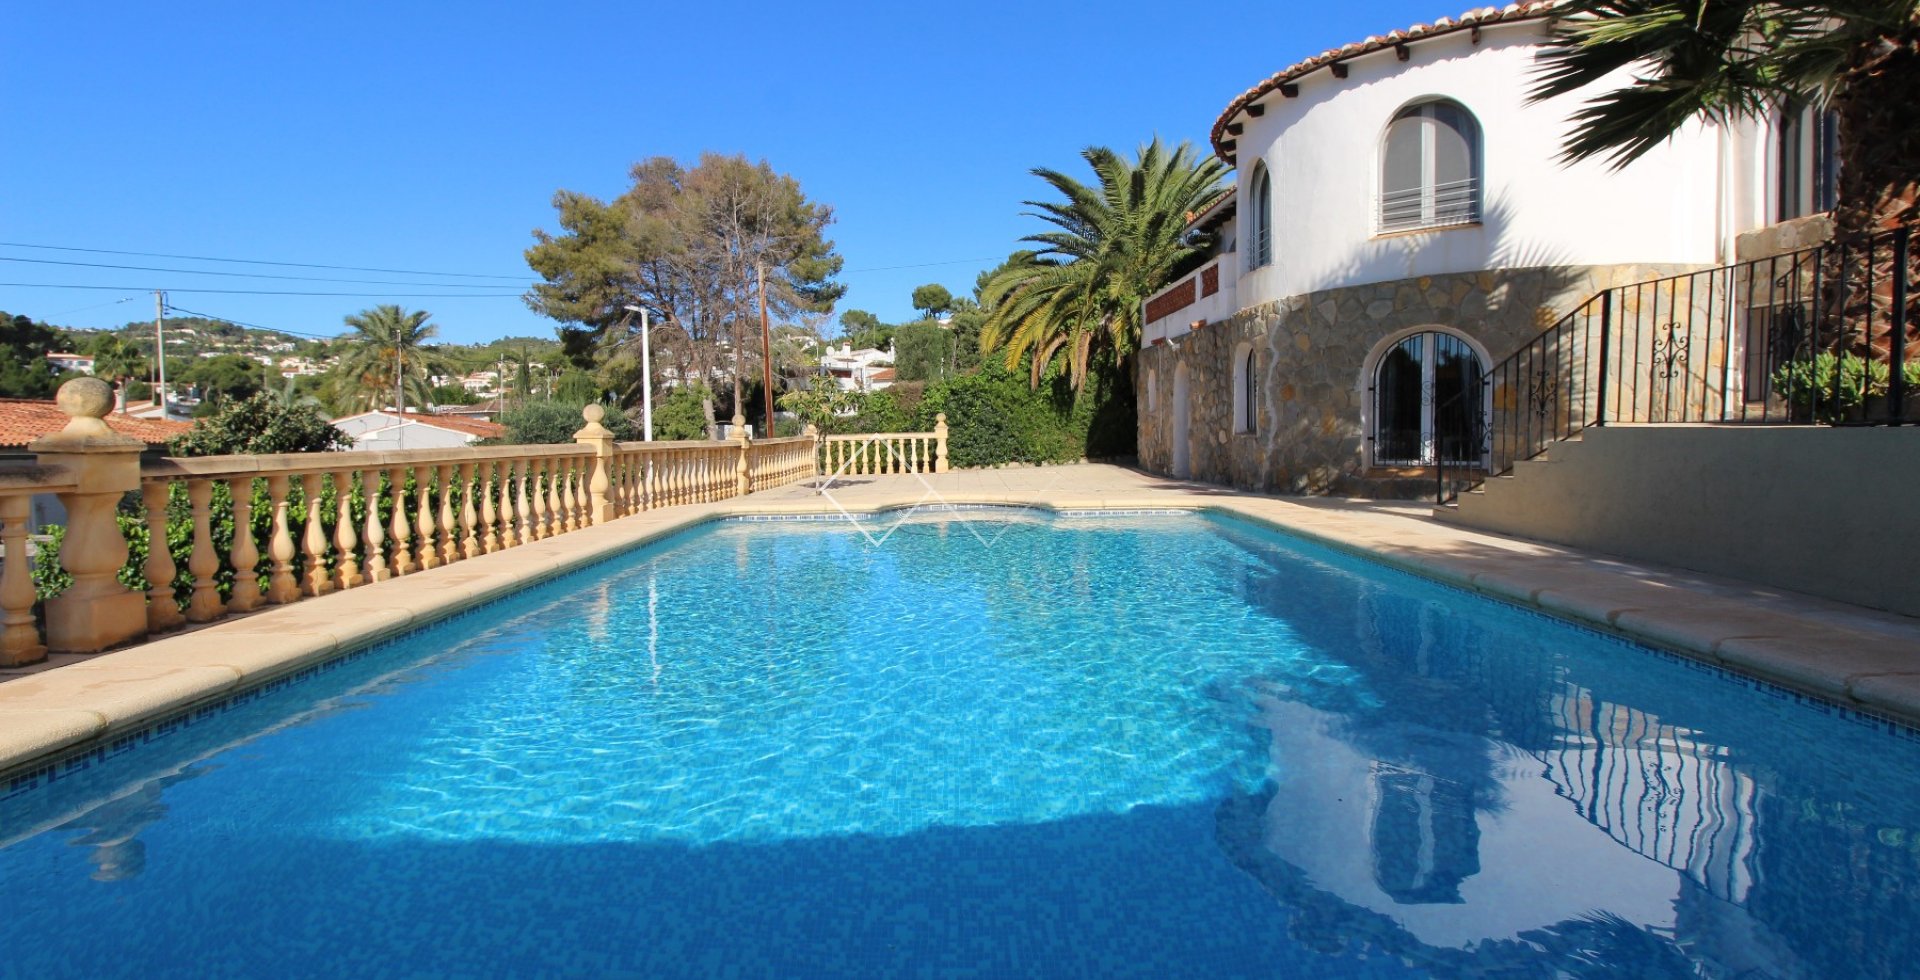 pool - Renovated villa for sale in Benissa, 400m from beach